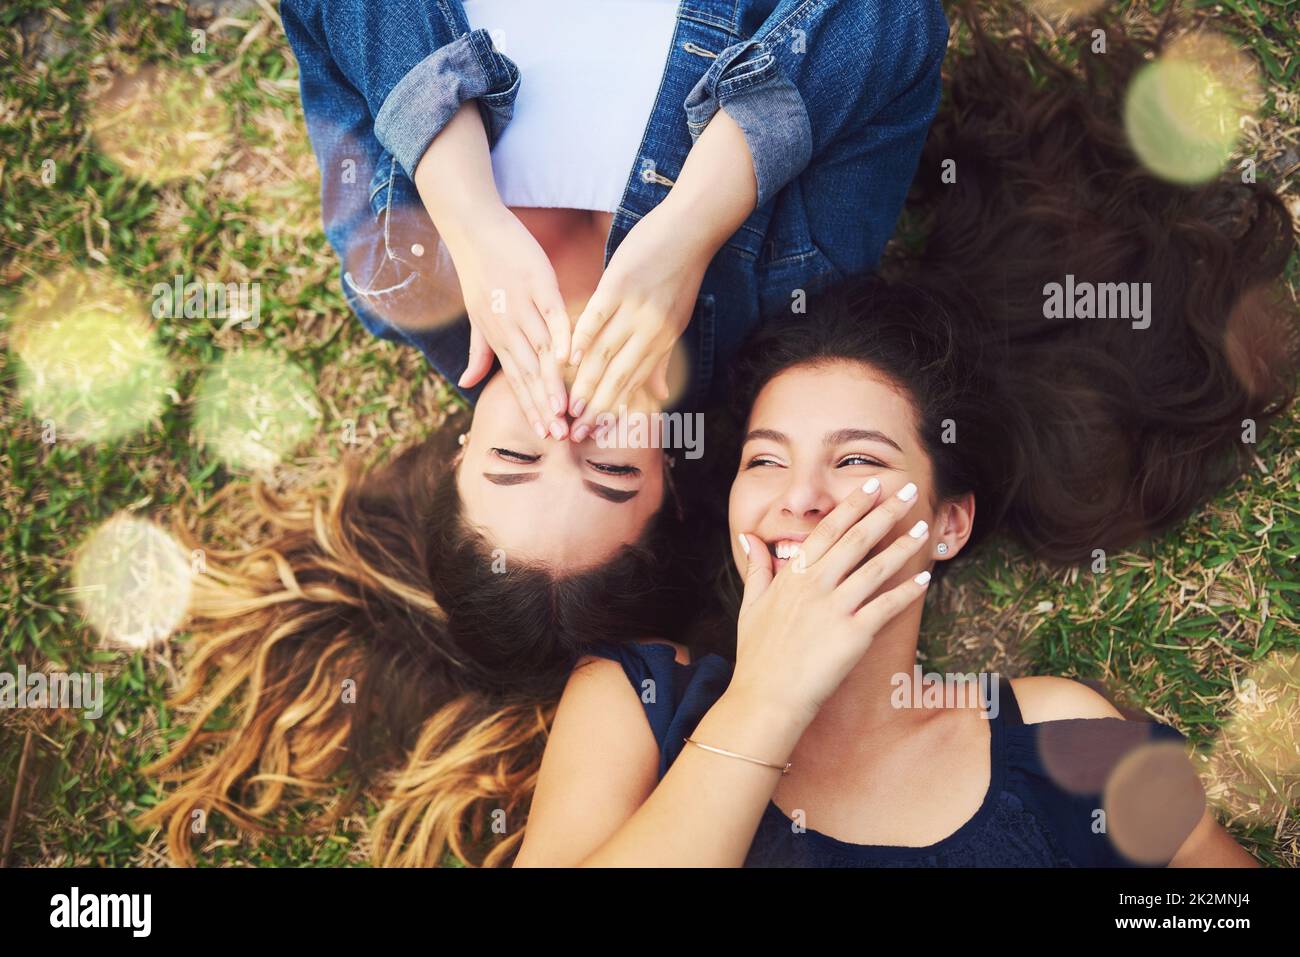 Her jokes are the funniest. High angle shot of two female best friends spending the day in a public park. Stock Photo